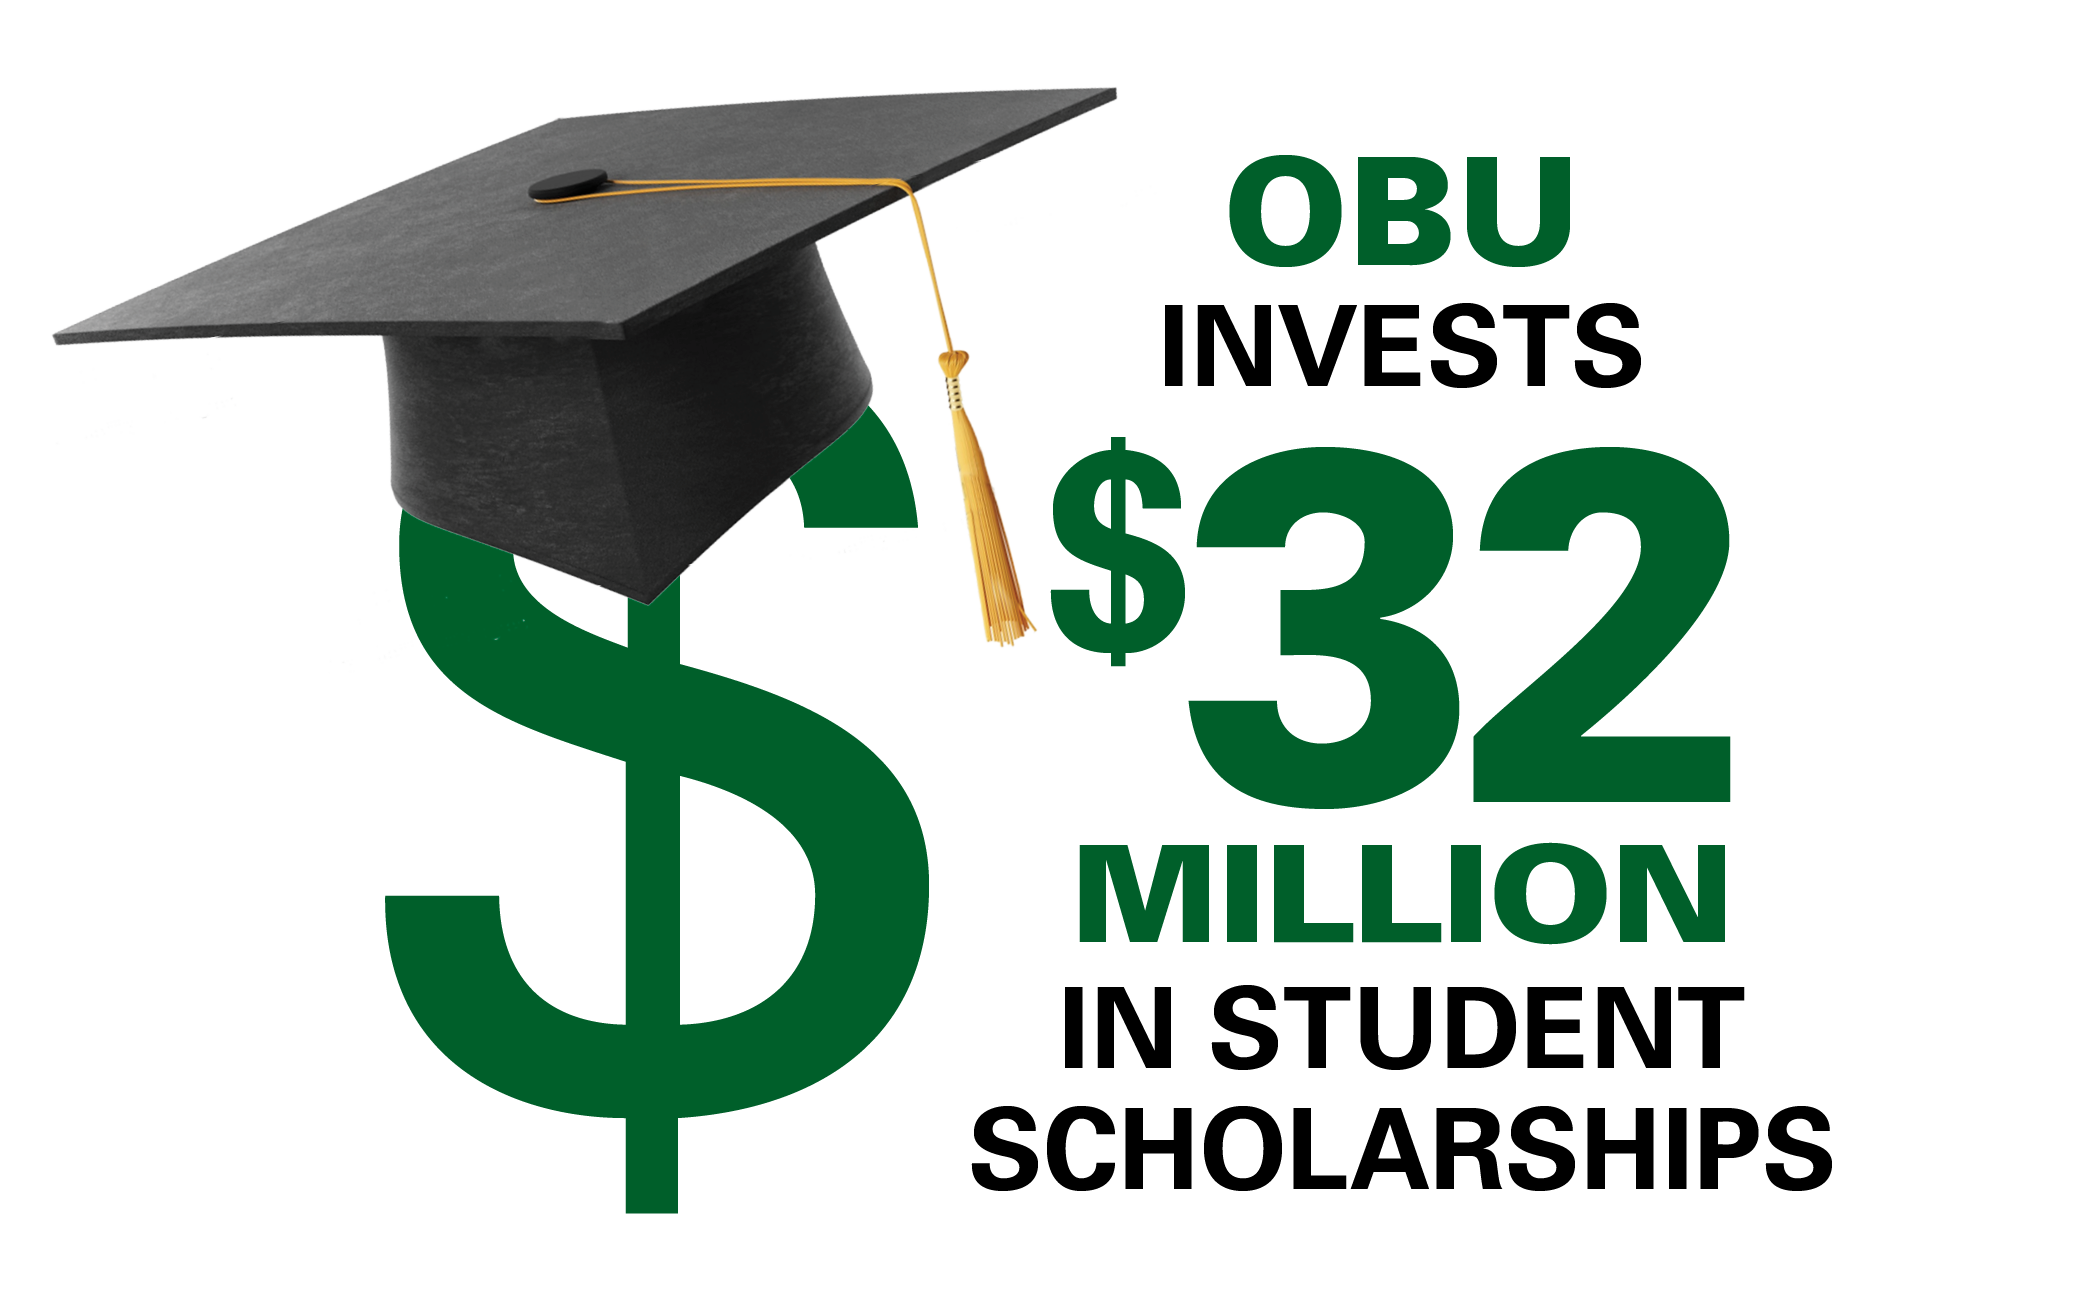 OBU invests $32 million in student scholarships.